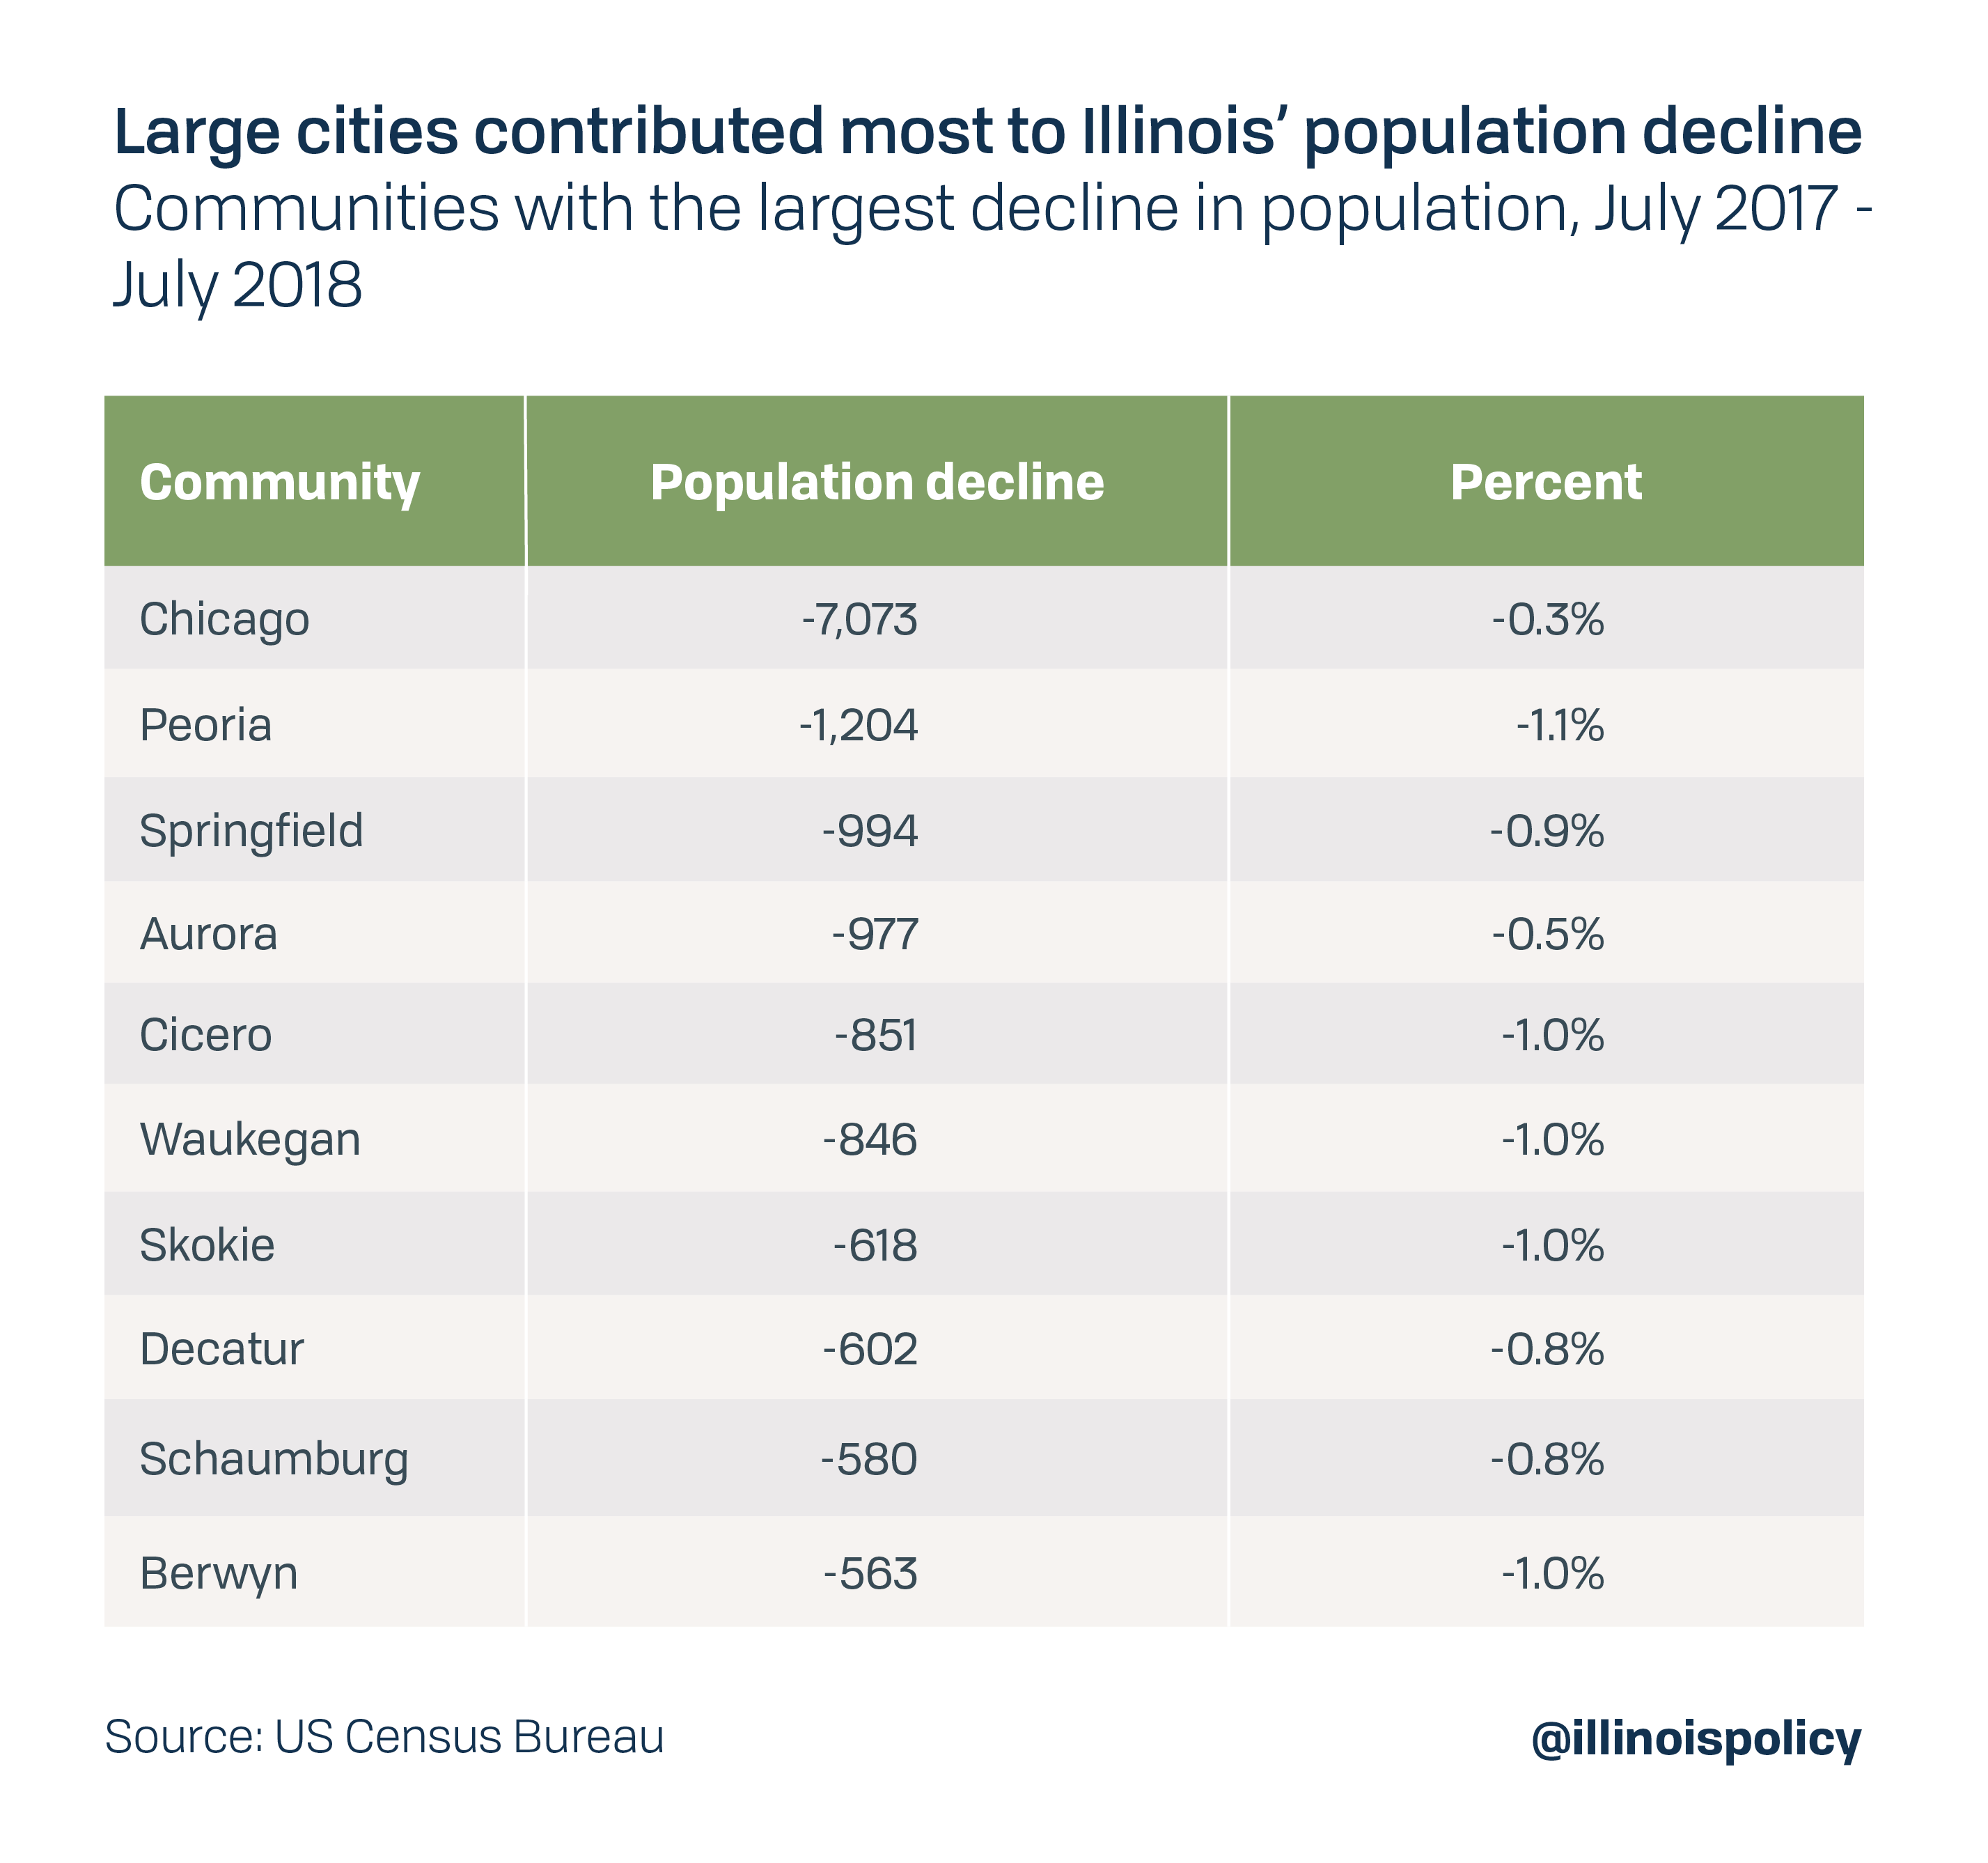 Large cities contributed most to Illinois' population decline